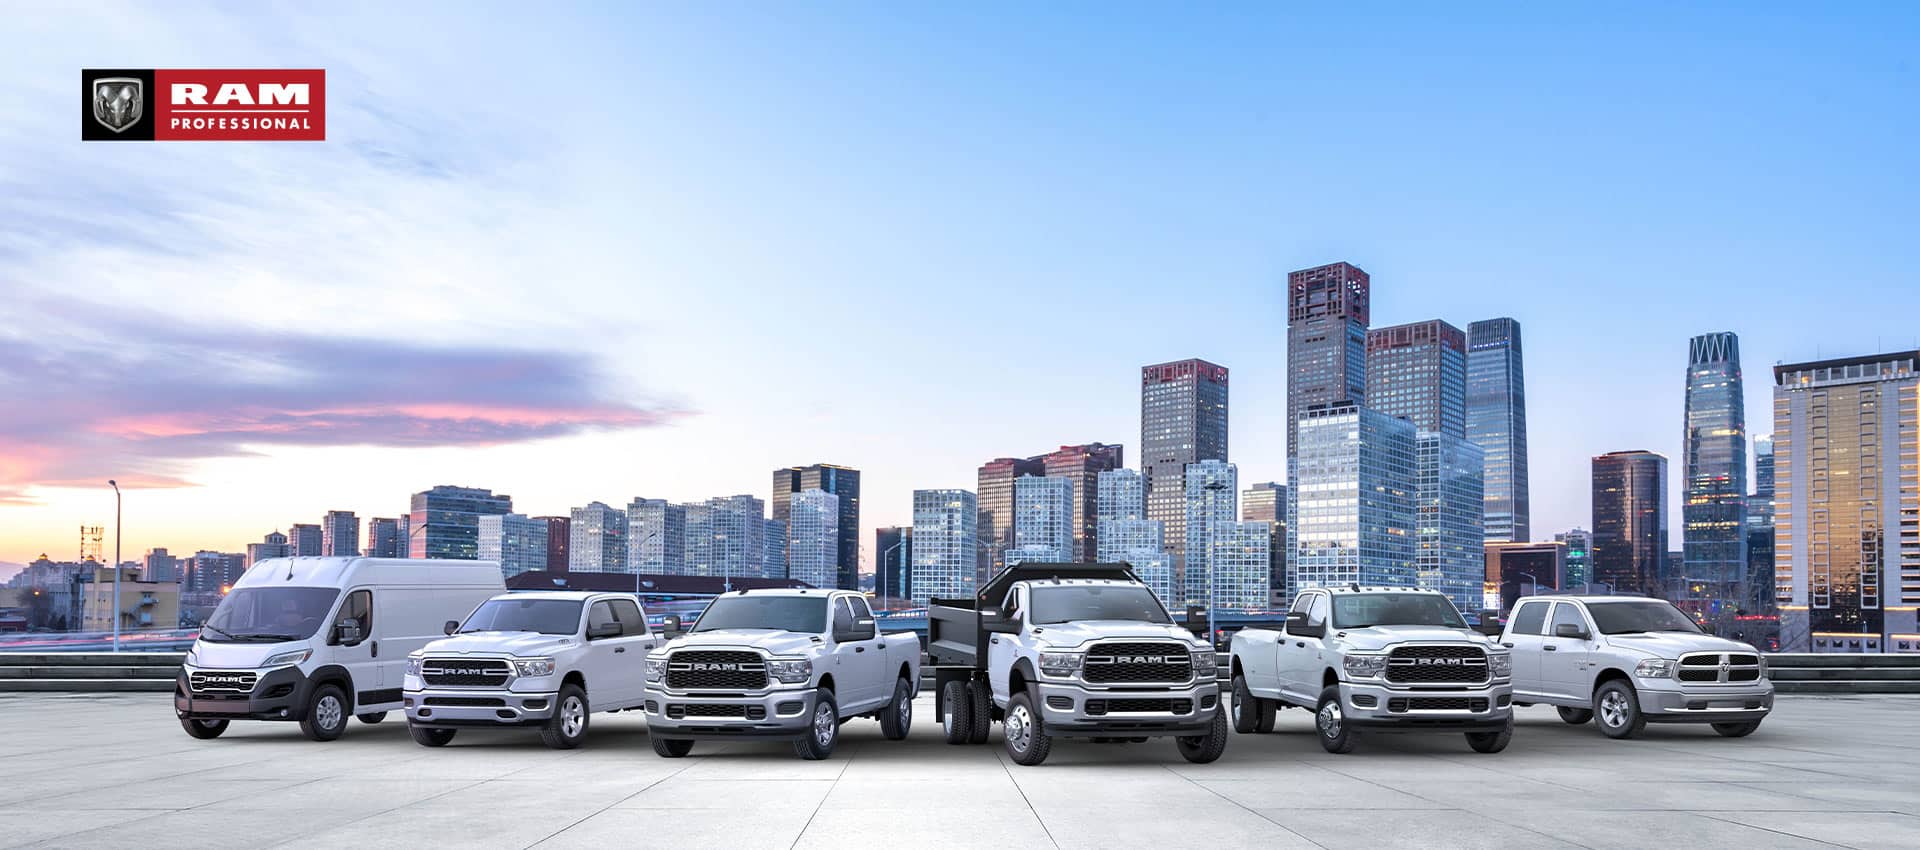 The Ram Brand lineup, all in white, parked side-by-side with a cityscape at dusk in the background. Beginning on the left: a 2024 Ram ProMaster 3500 High Roof Cargo Van, 2024 Ram 1500 Tradesman Crew Cab, 2024 Ram 2500 Tradesman Crew Cab, 2024 Ram 5500 Tradesman Regular Cab with dump body, 2024 Ram 3500 Tradesman Crew Cab and 2024 Ram 1500 Classic Tradesman Crew Cab. Ram Professional.